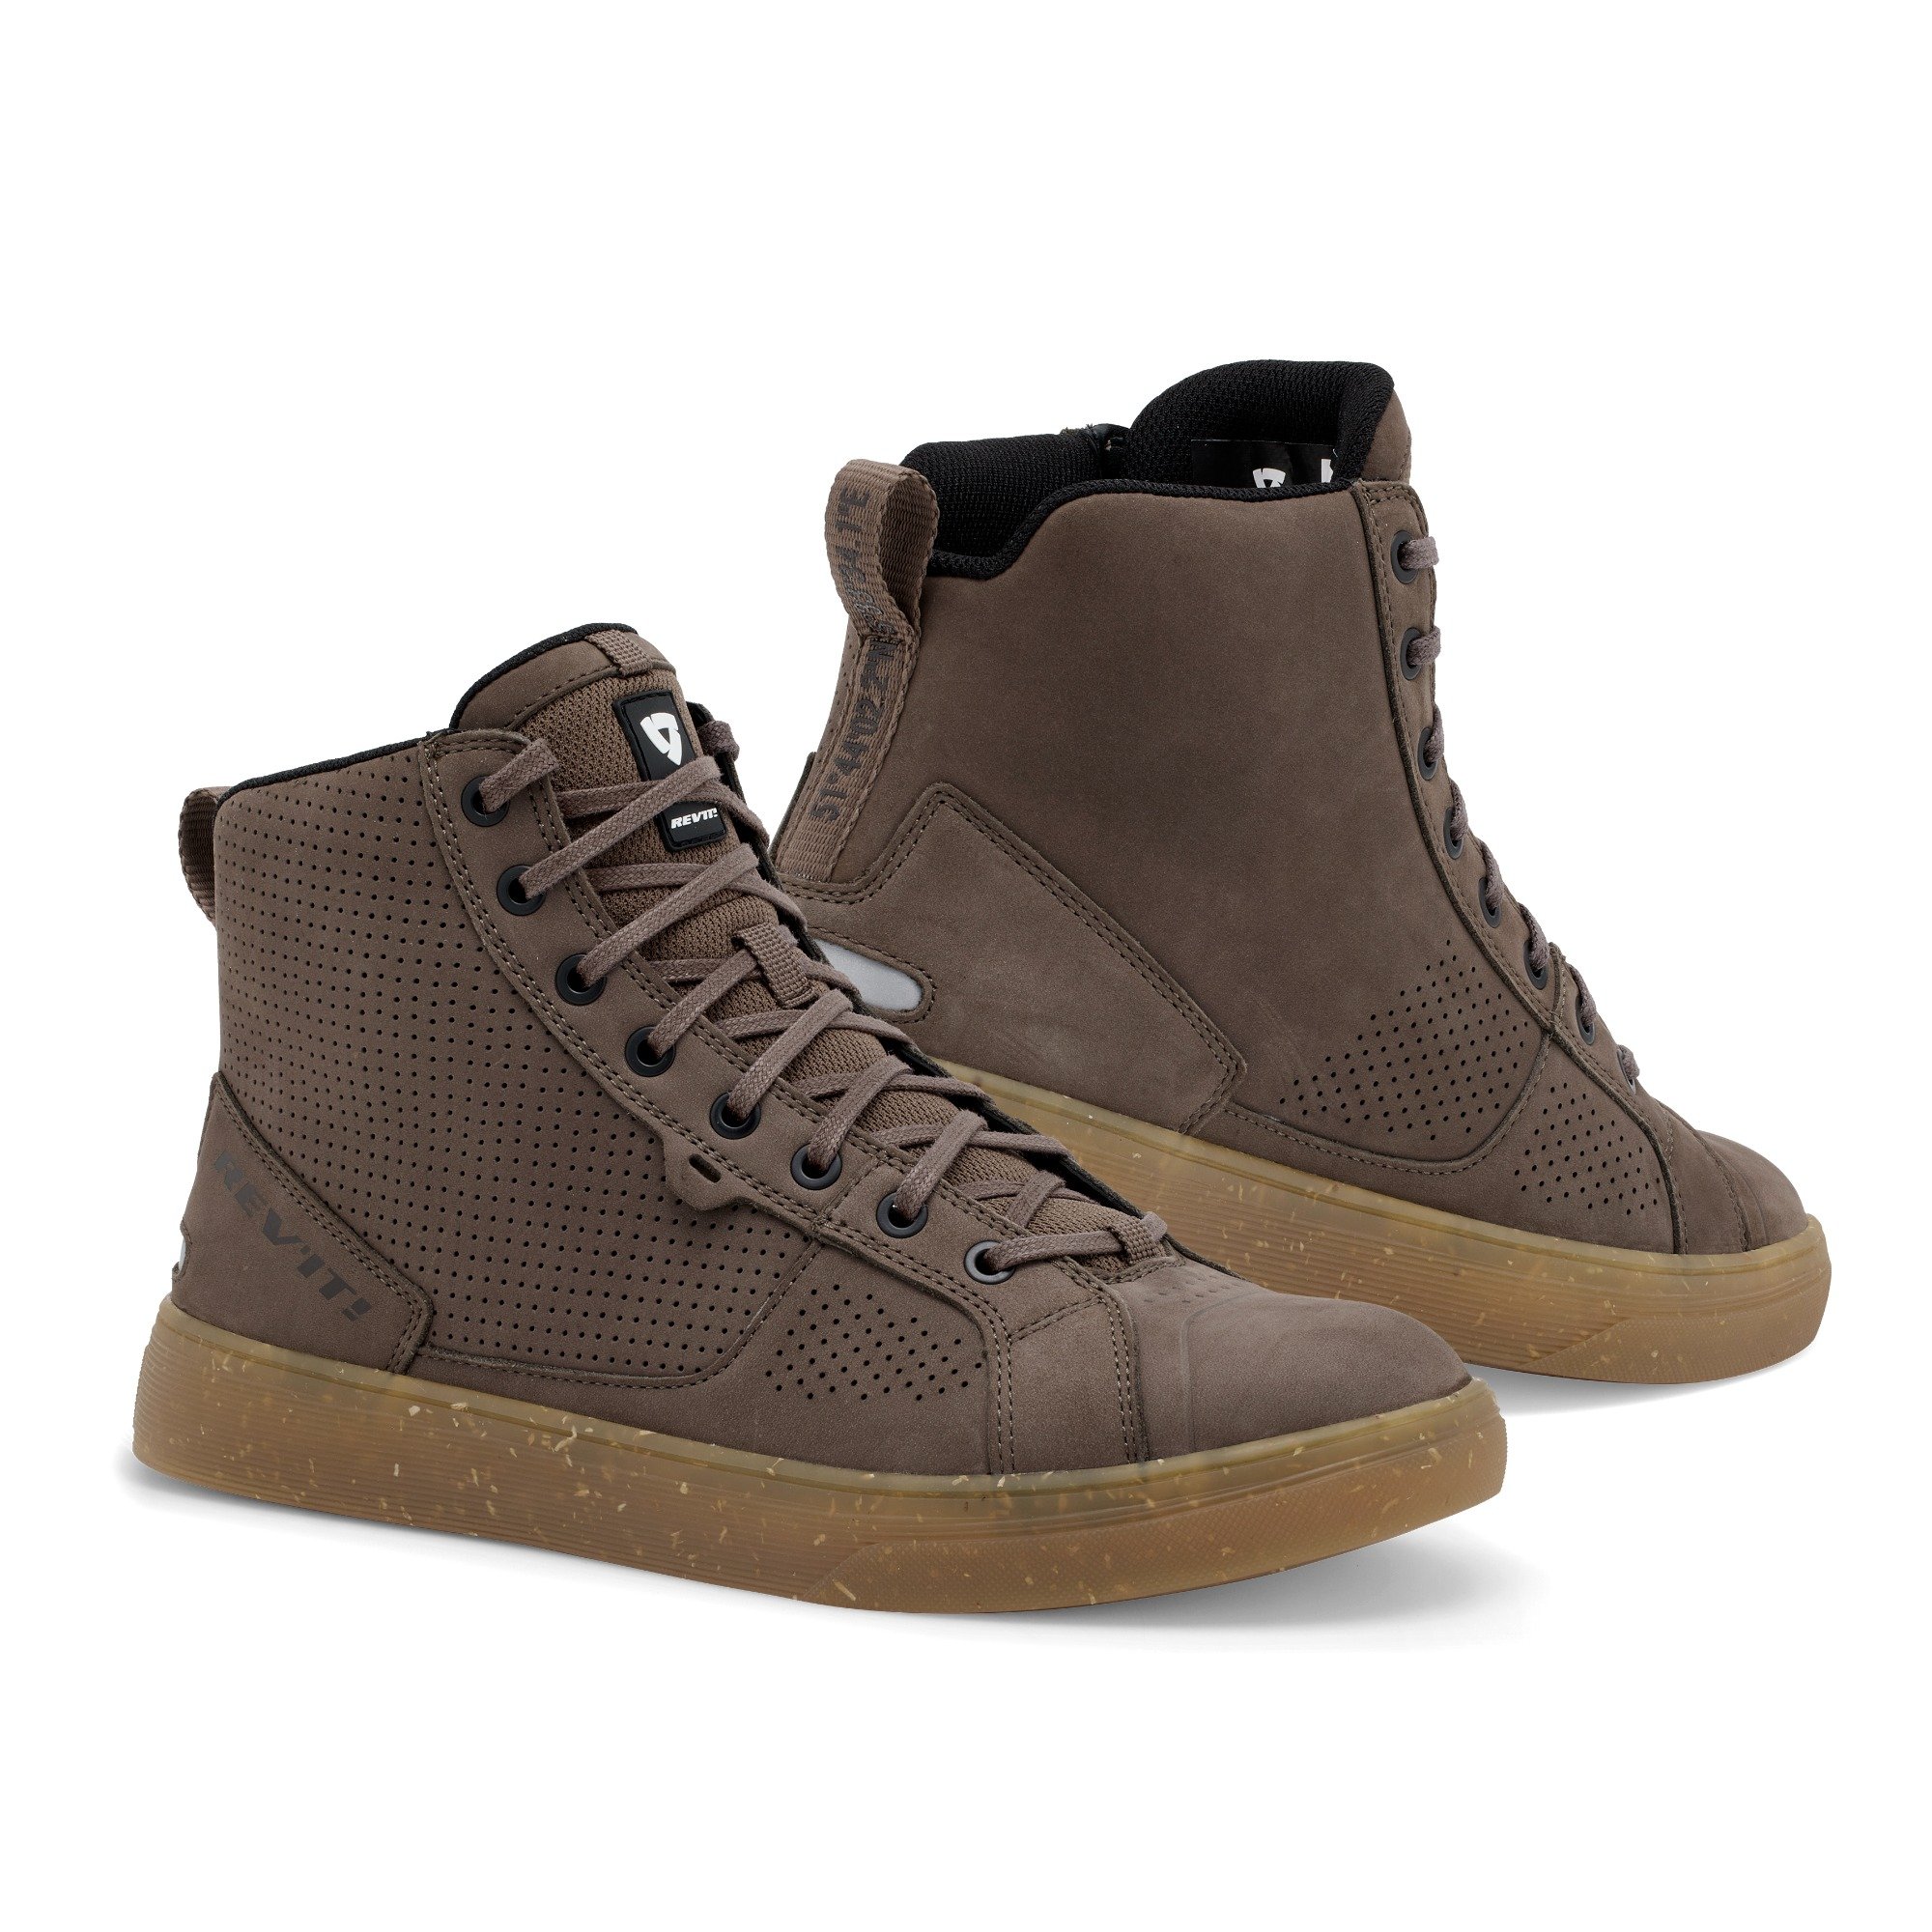 Image of EU REV'IT! Arrow Chaussures Taupe Marron Taille 43